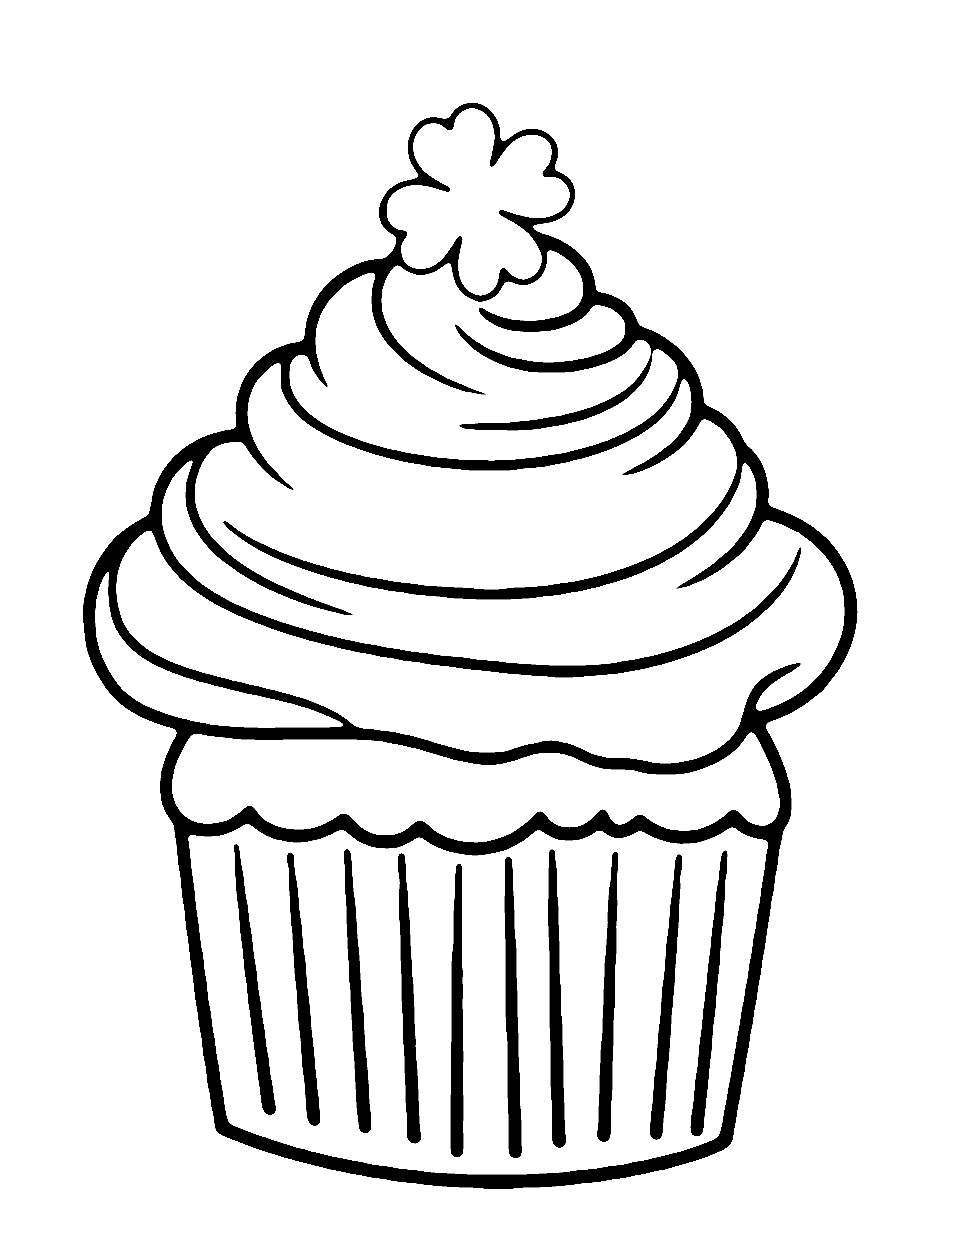 Happy St. Patrick's Day Cupcake Coloring Page - A delicious cupcake with green frosting and a shamrock on top.